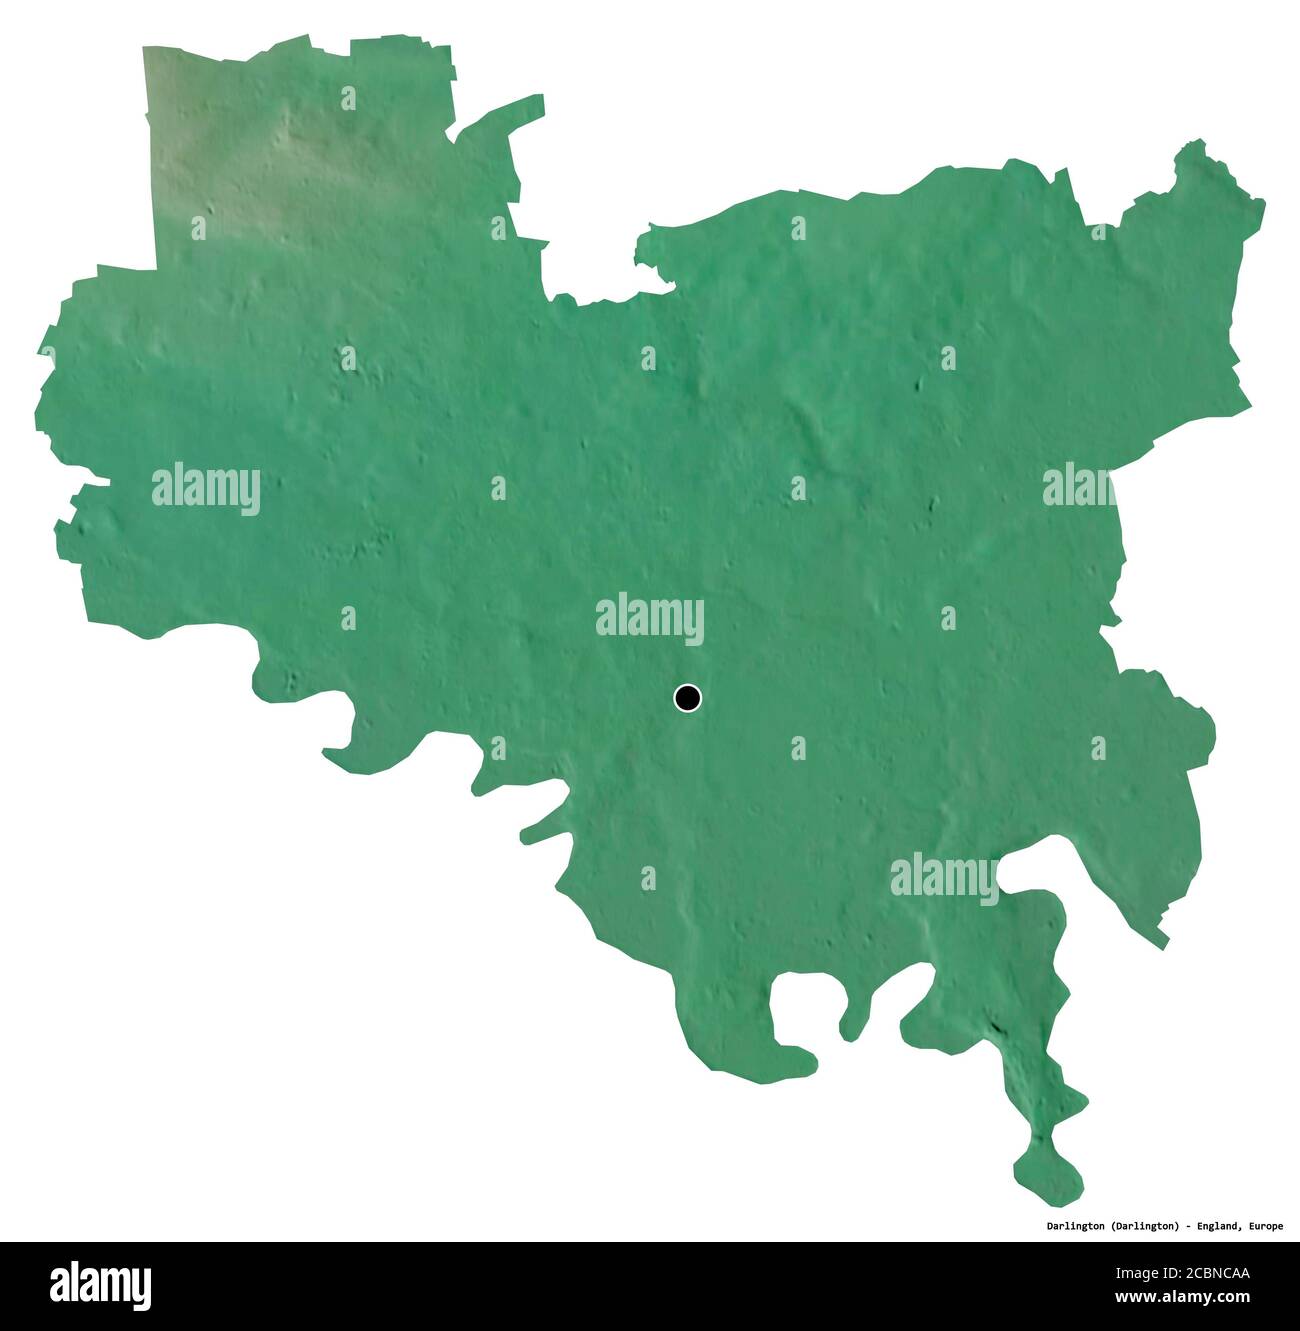 Shape of Darlington, unitary authority of England, with its capital isolated on white background. Topographic relief map. 3D rendering Stock Photo